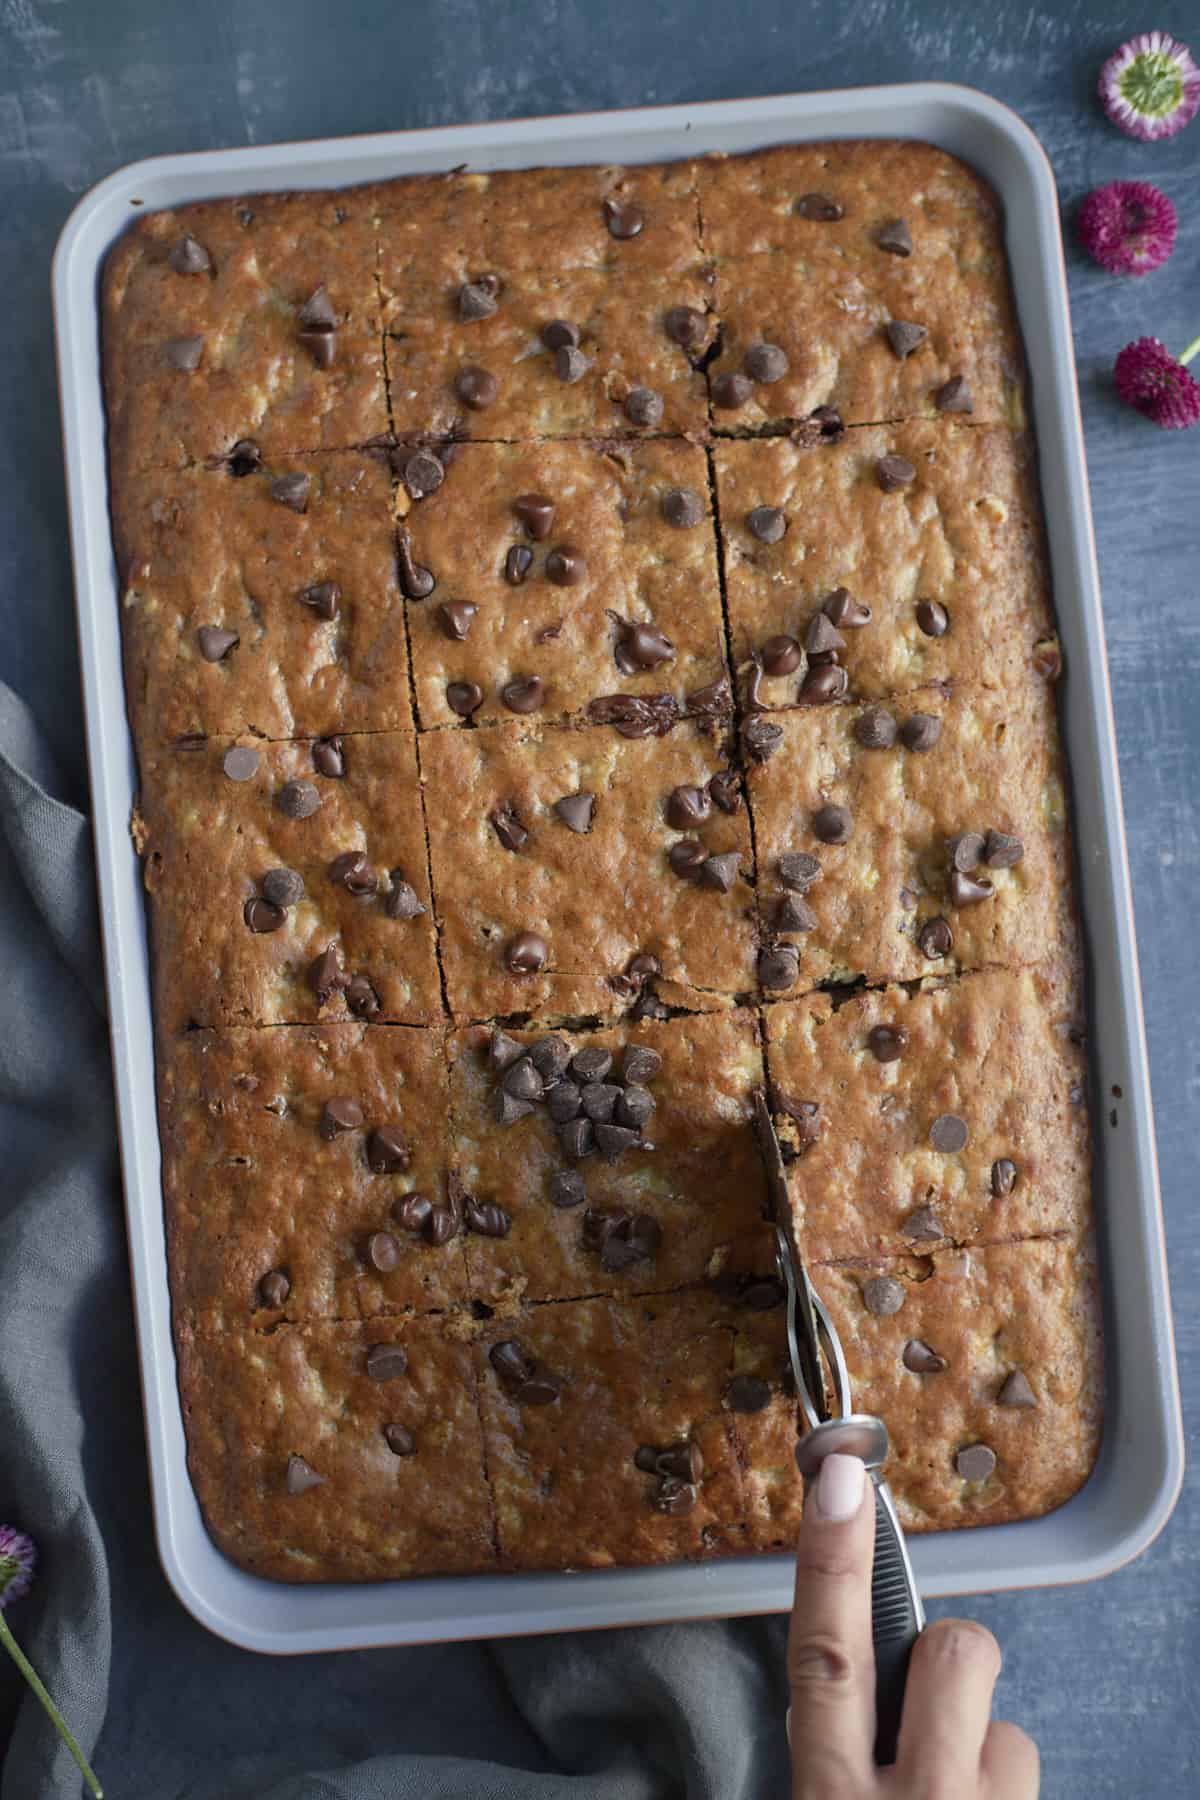 banana bread in a sheet pan. A pizza cutter cuts it into slices